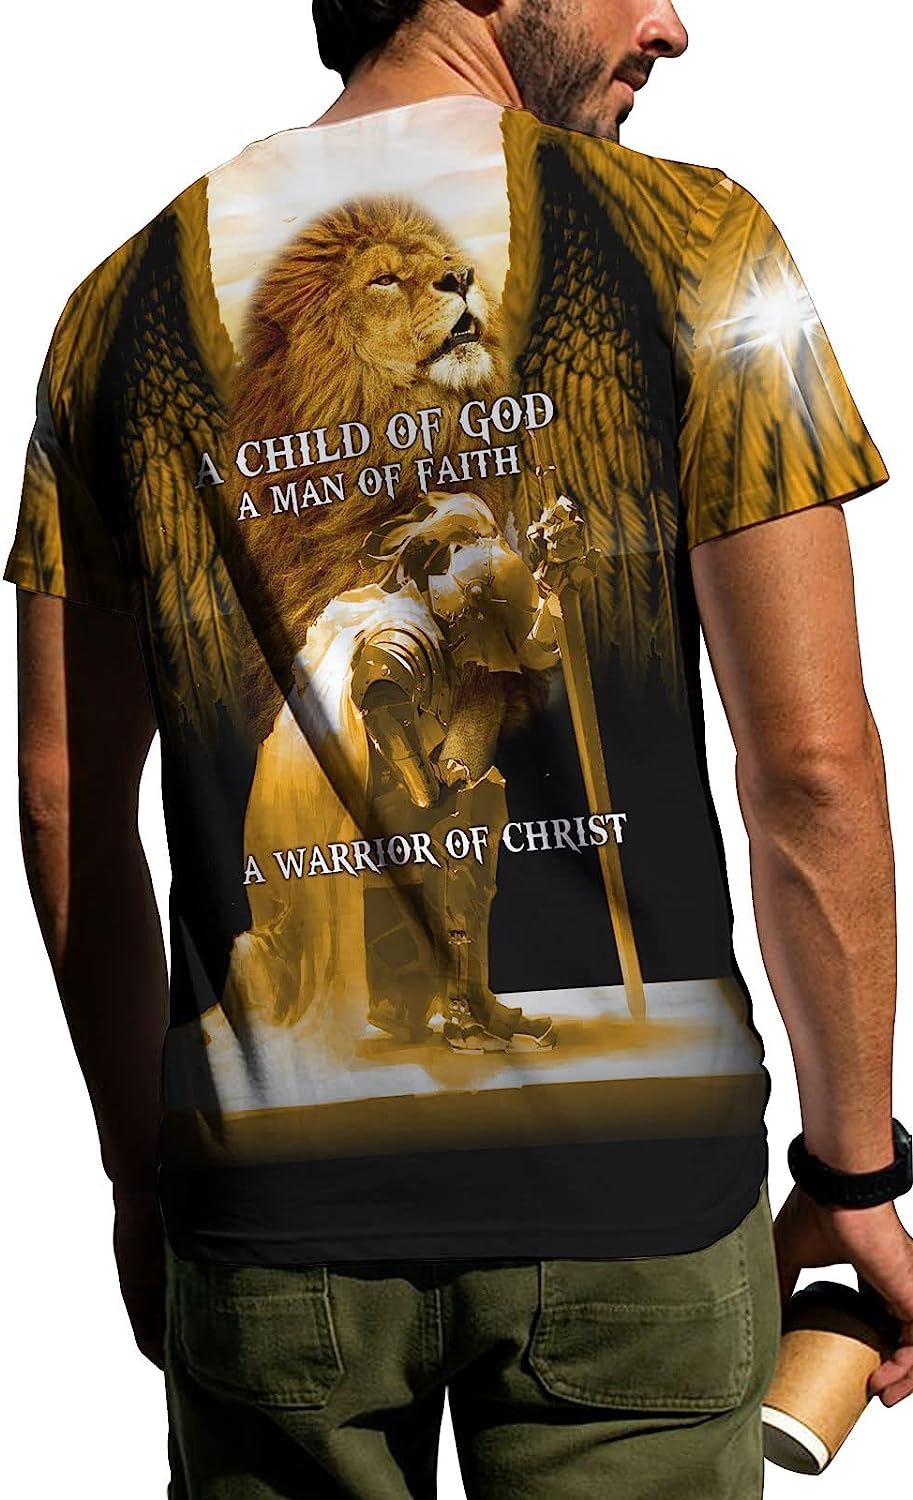 A Child Of God Woman Of Faith Warrior Of Christ All Over Printed 3D T Shirt - Christian Shirts for Men Women